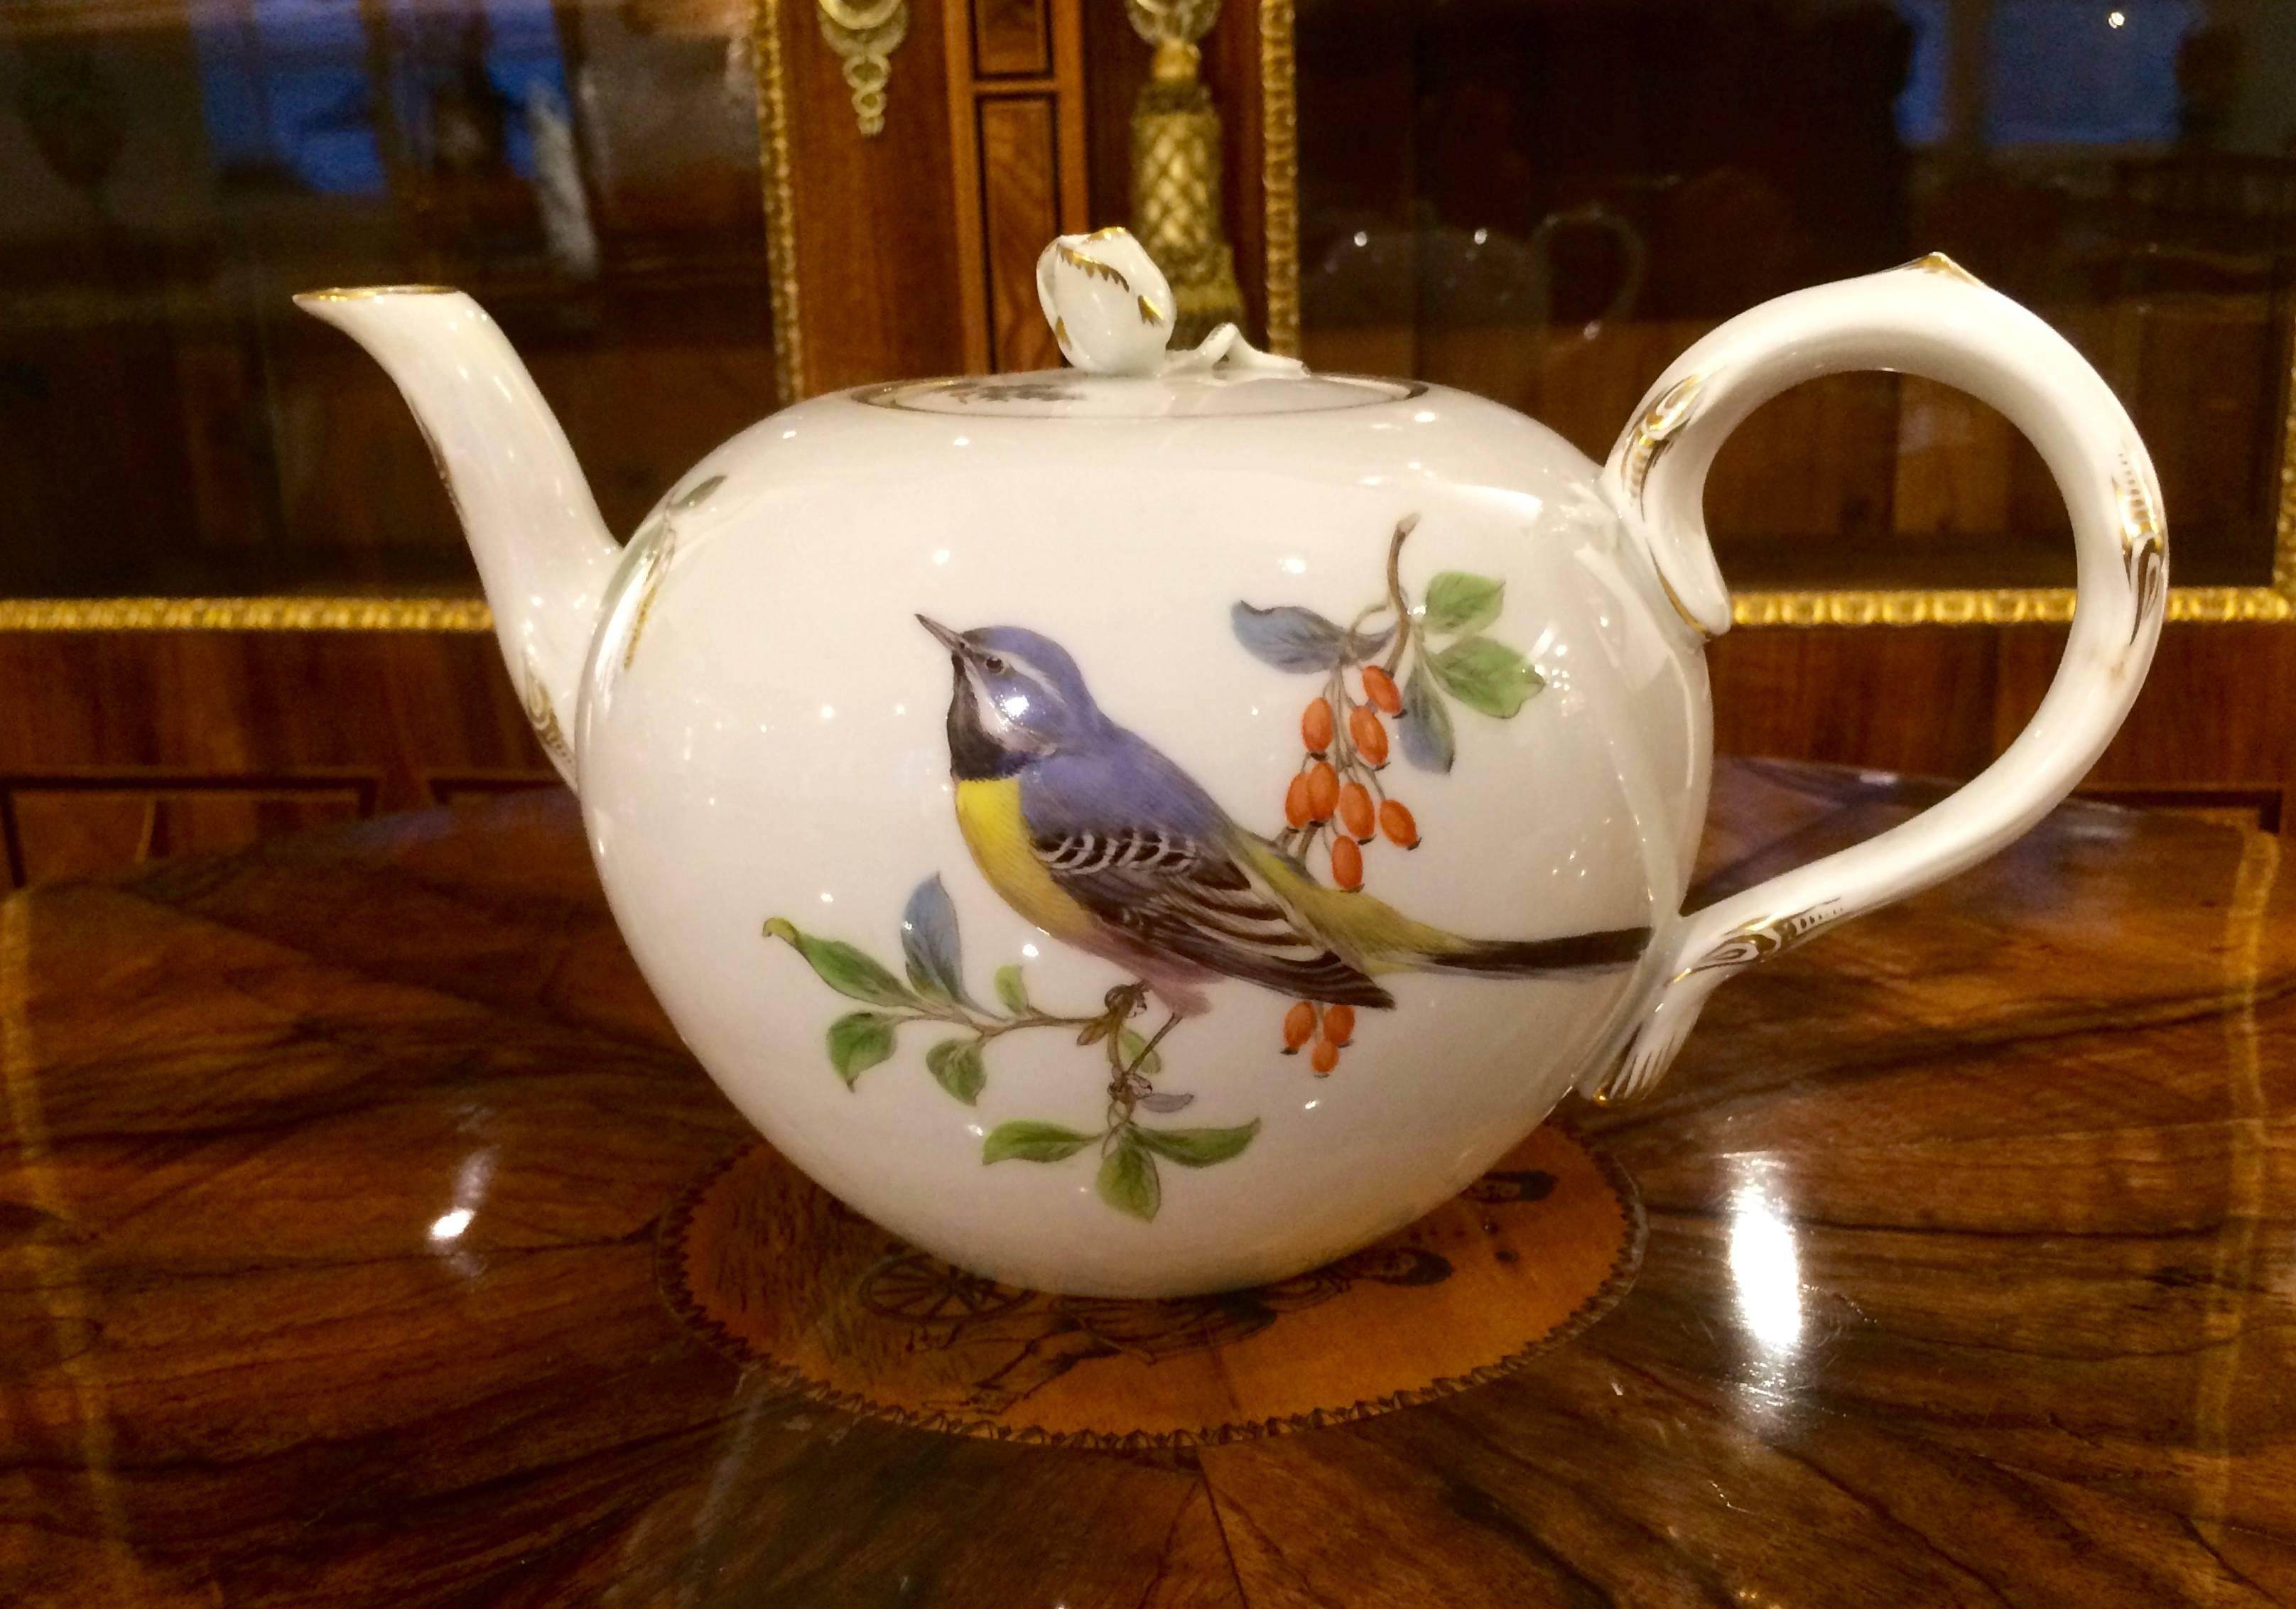 Meißen coffee and tea service, 20th century, 42 parts for 12 persons.
Artfully painted in high quality with birds and insects.